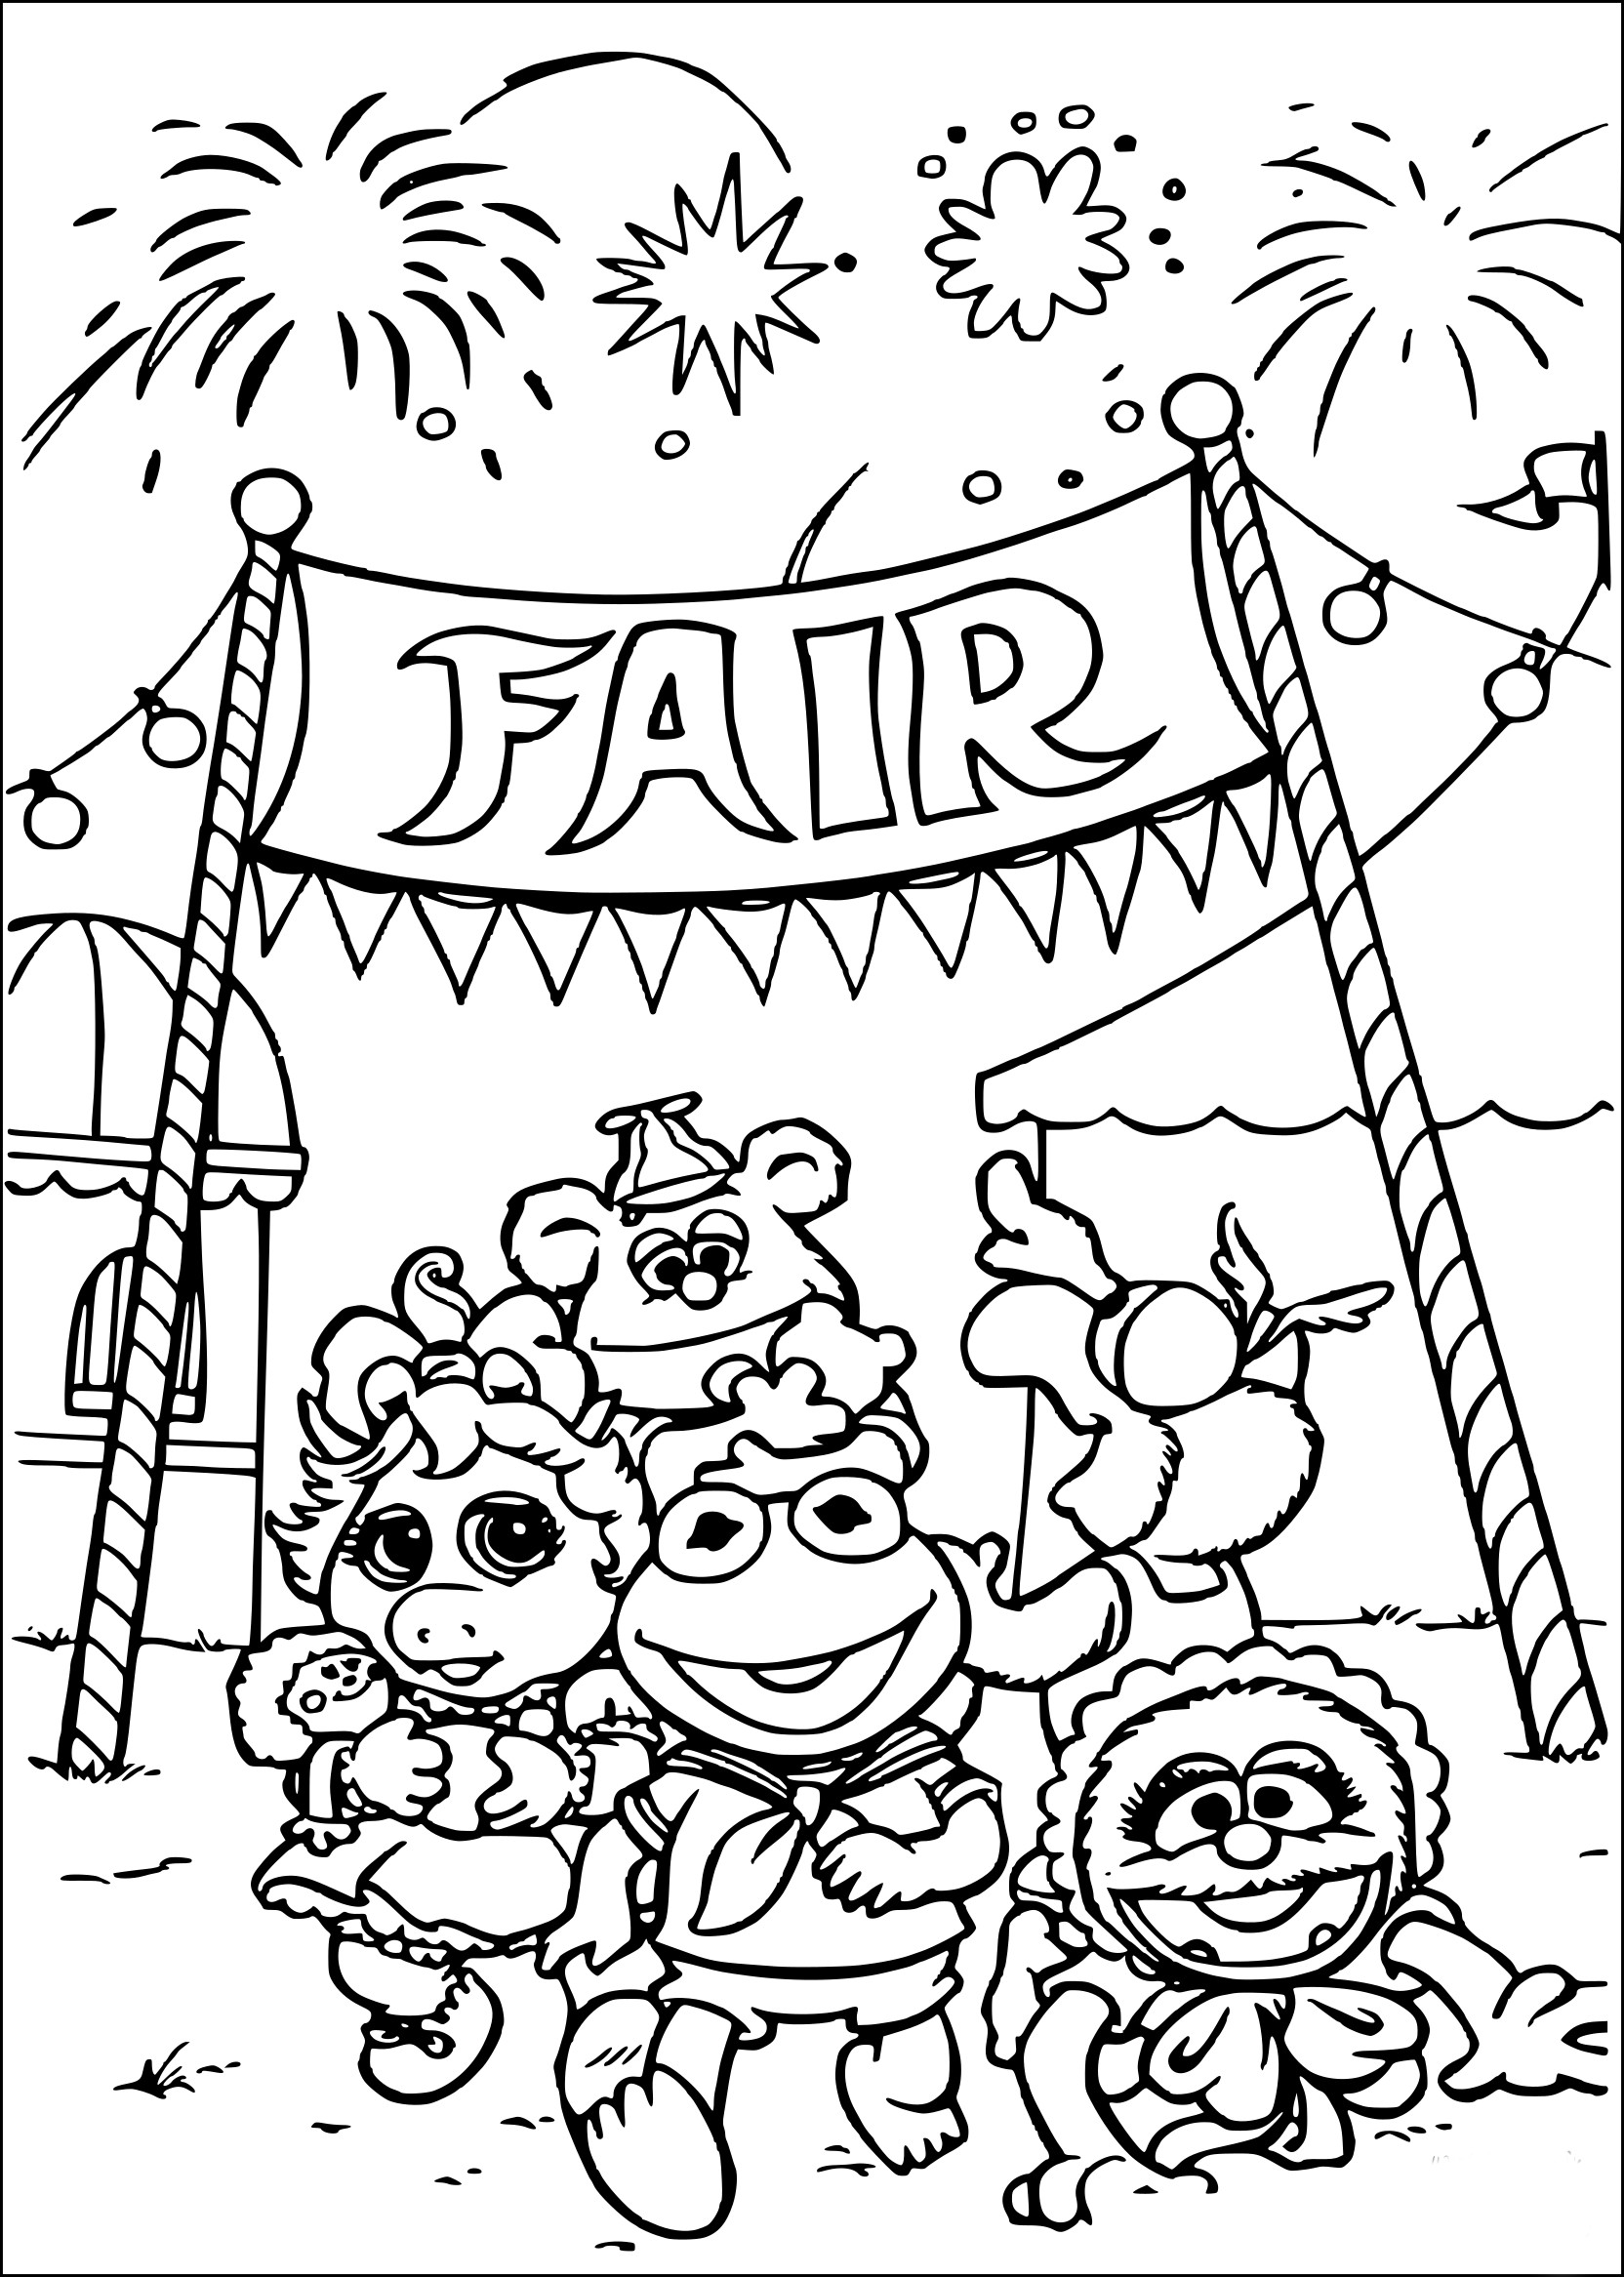 The Muppets coloring page